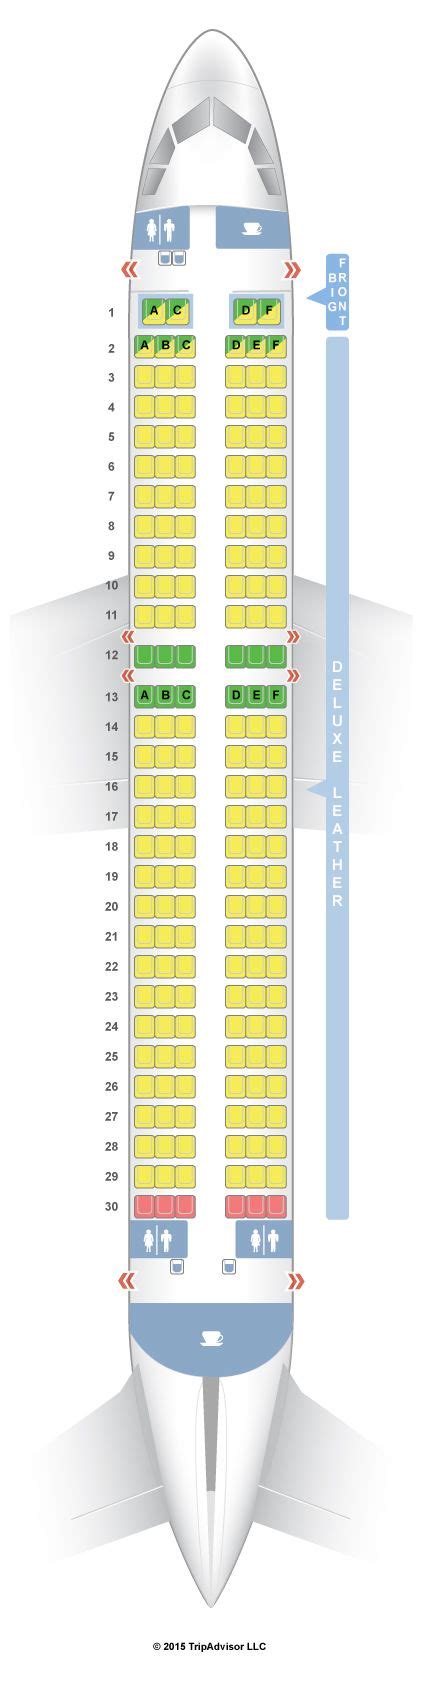 Learn About Imagen Airbus A Seat Map Spirit In Thptnganamst Edu Vn